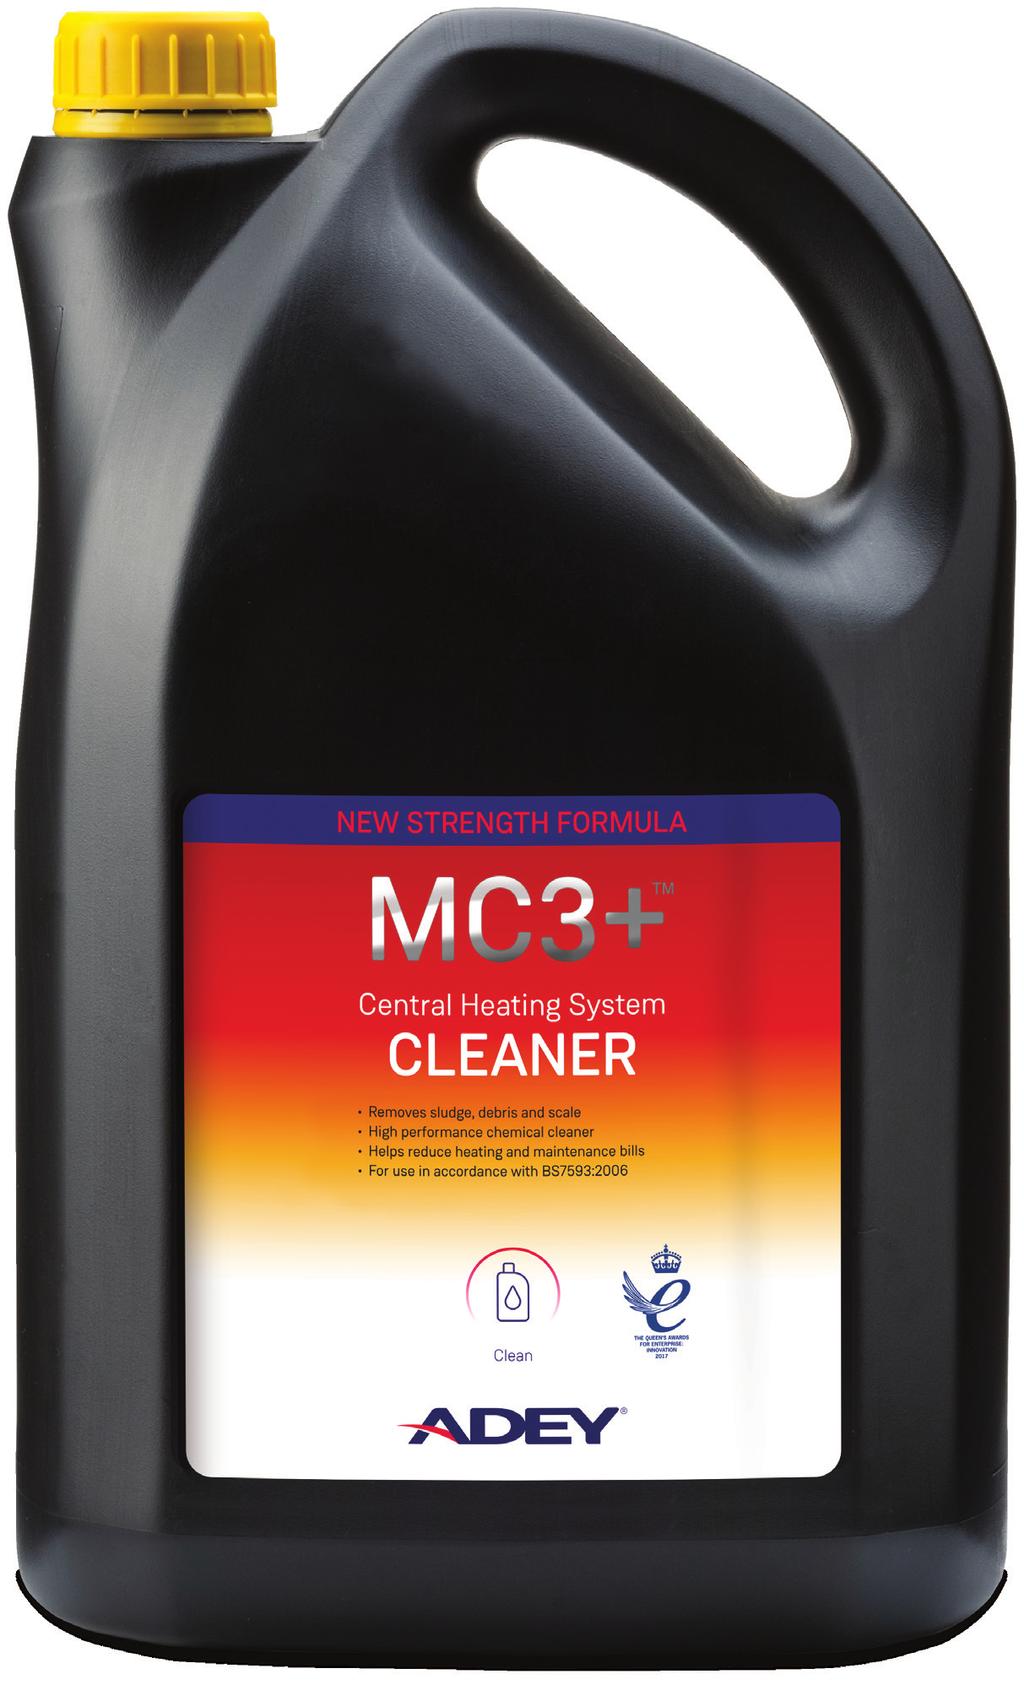 Central Heating System CLEANER MC3+ is a rapid performing and powerful chemical cleaner specially designed to remove central heating system sludge and debris.